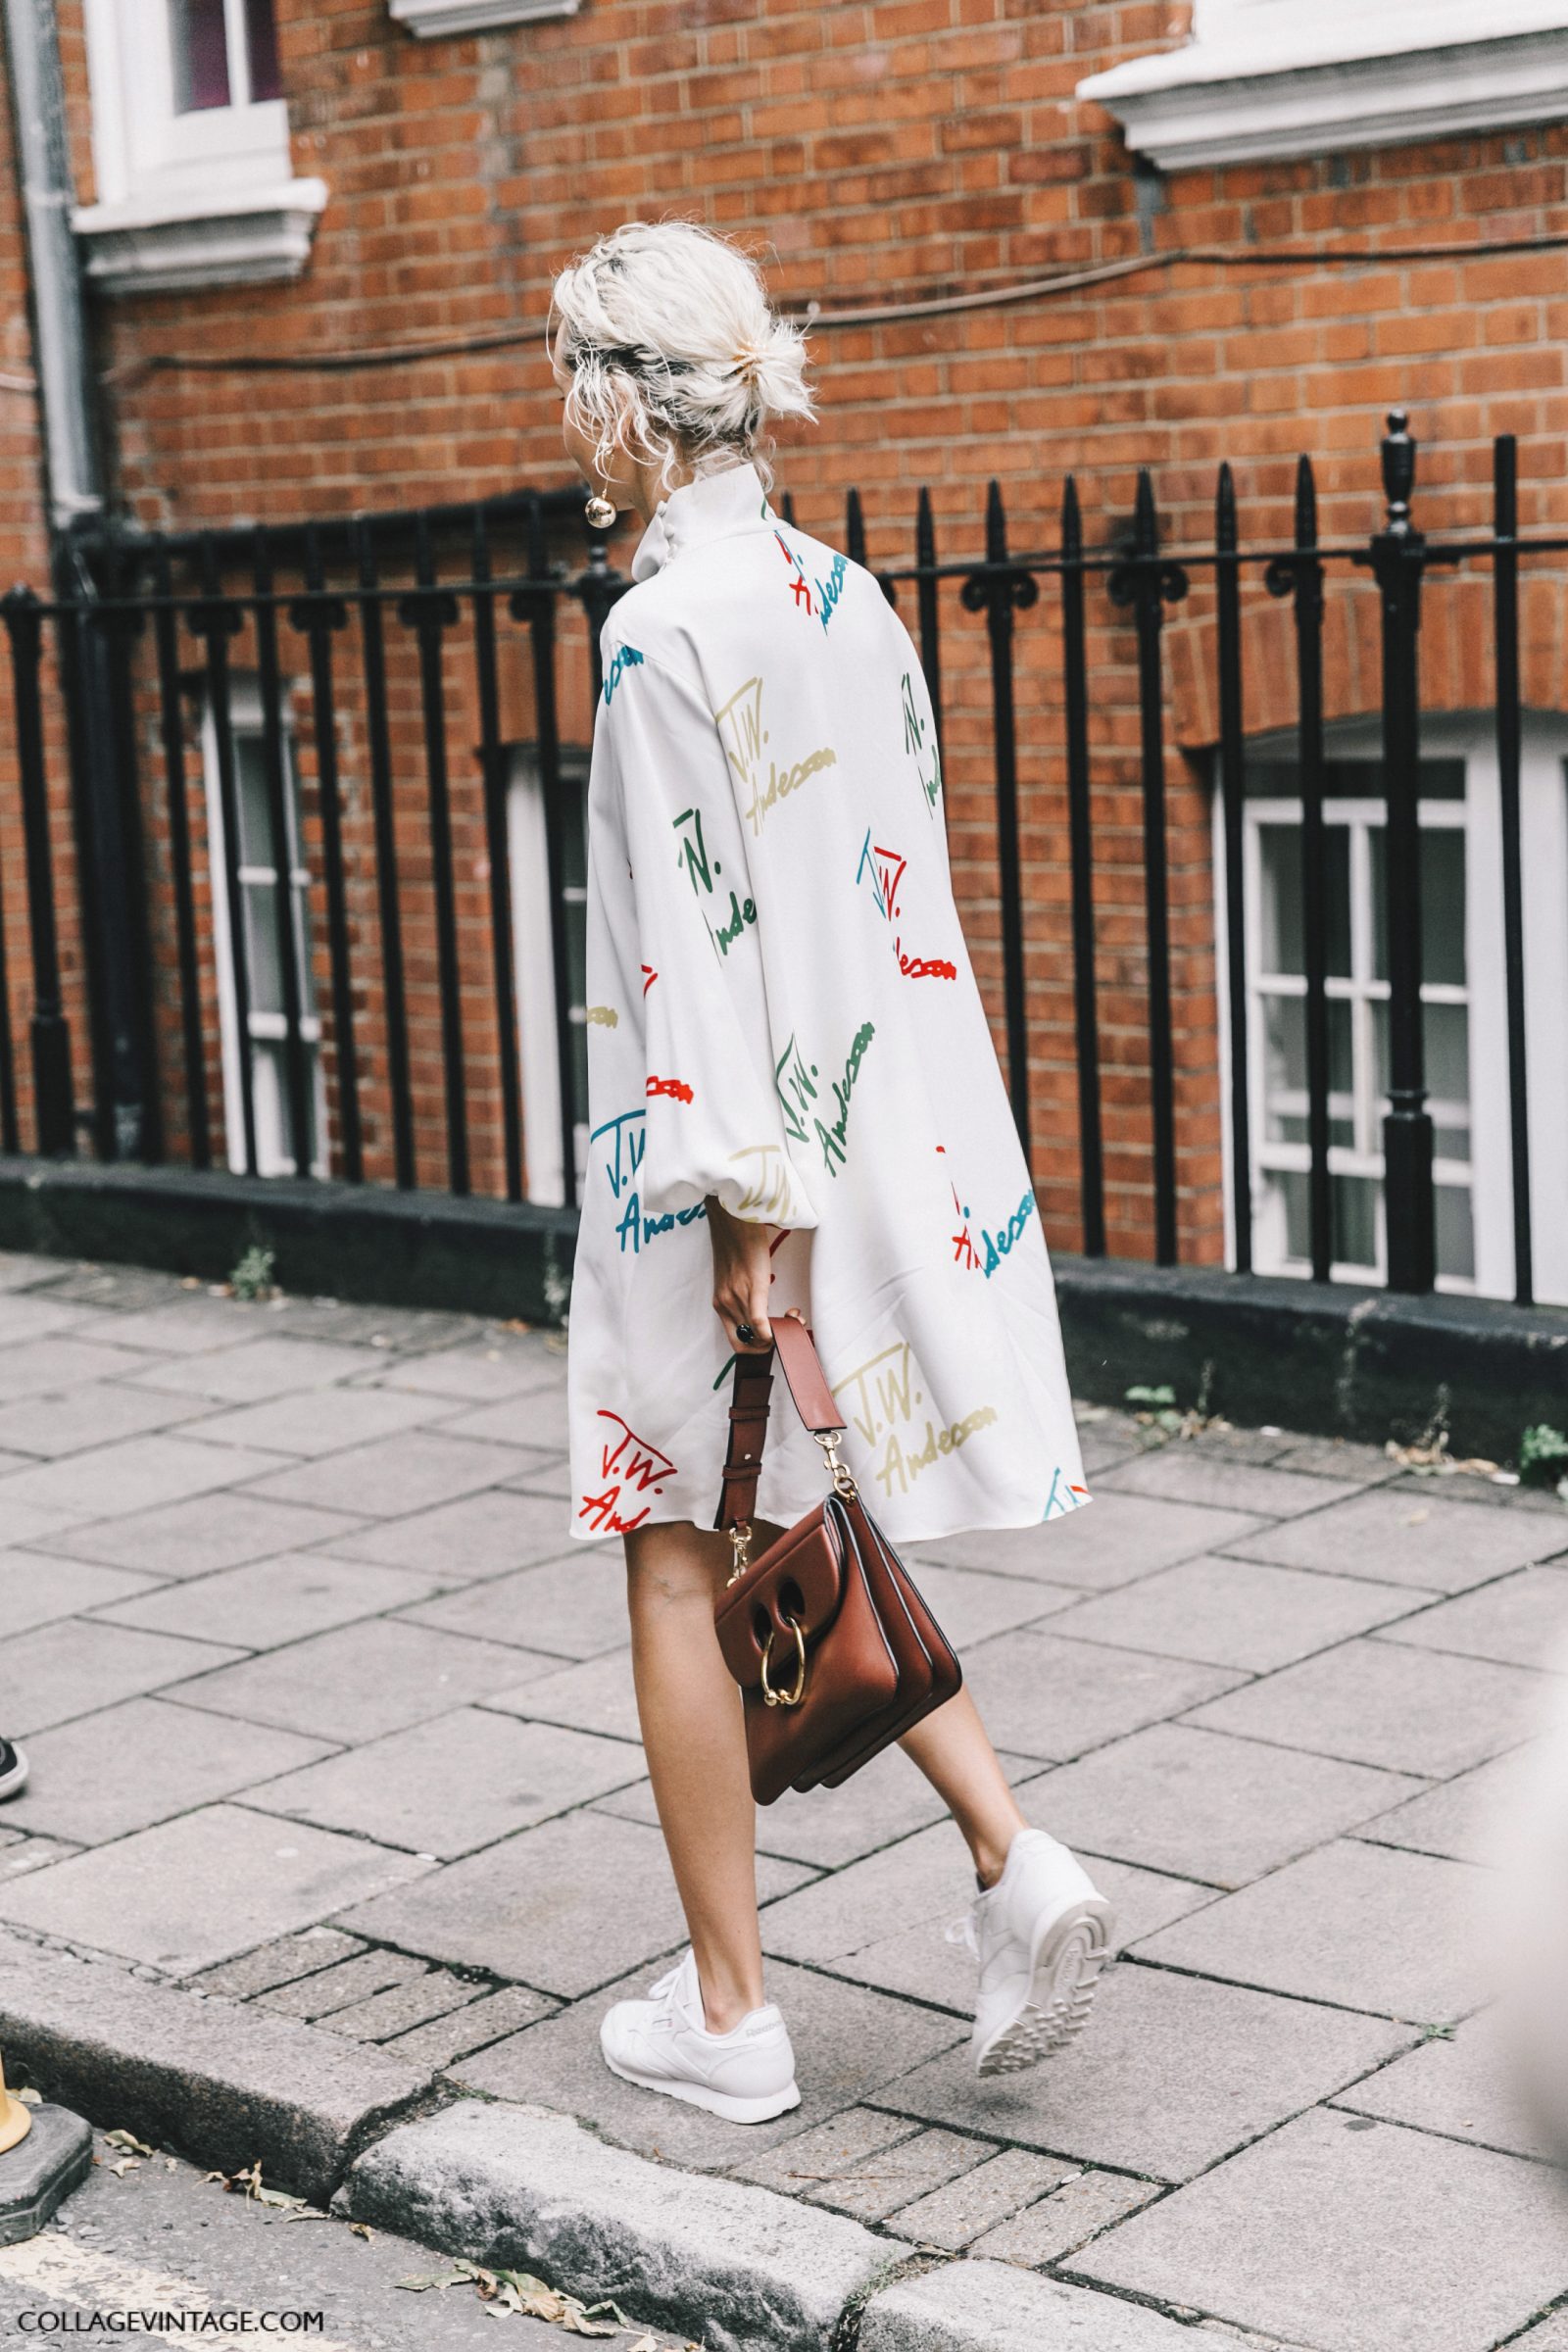 lfw-london_fashion_week_ss17-street_style-outfits-collage_vintage-vintage-jw_anderson-house_of_holland-174